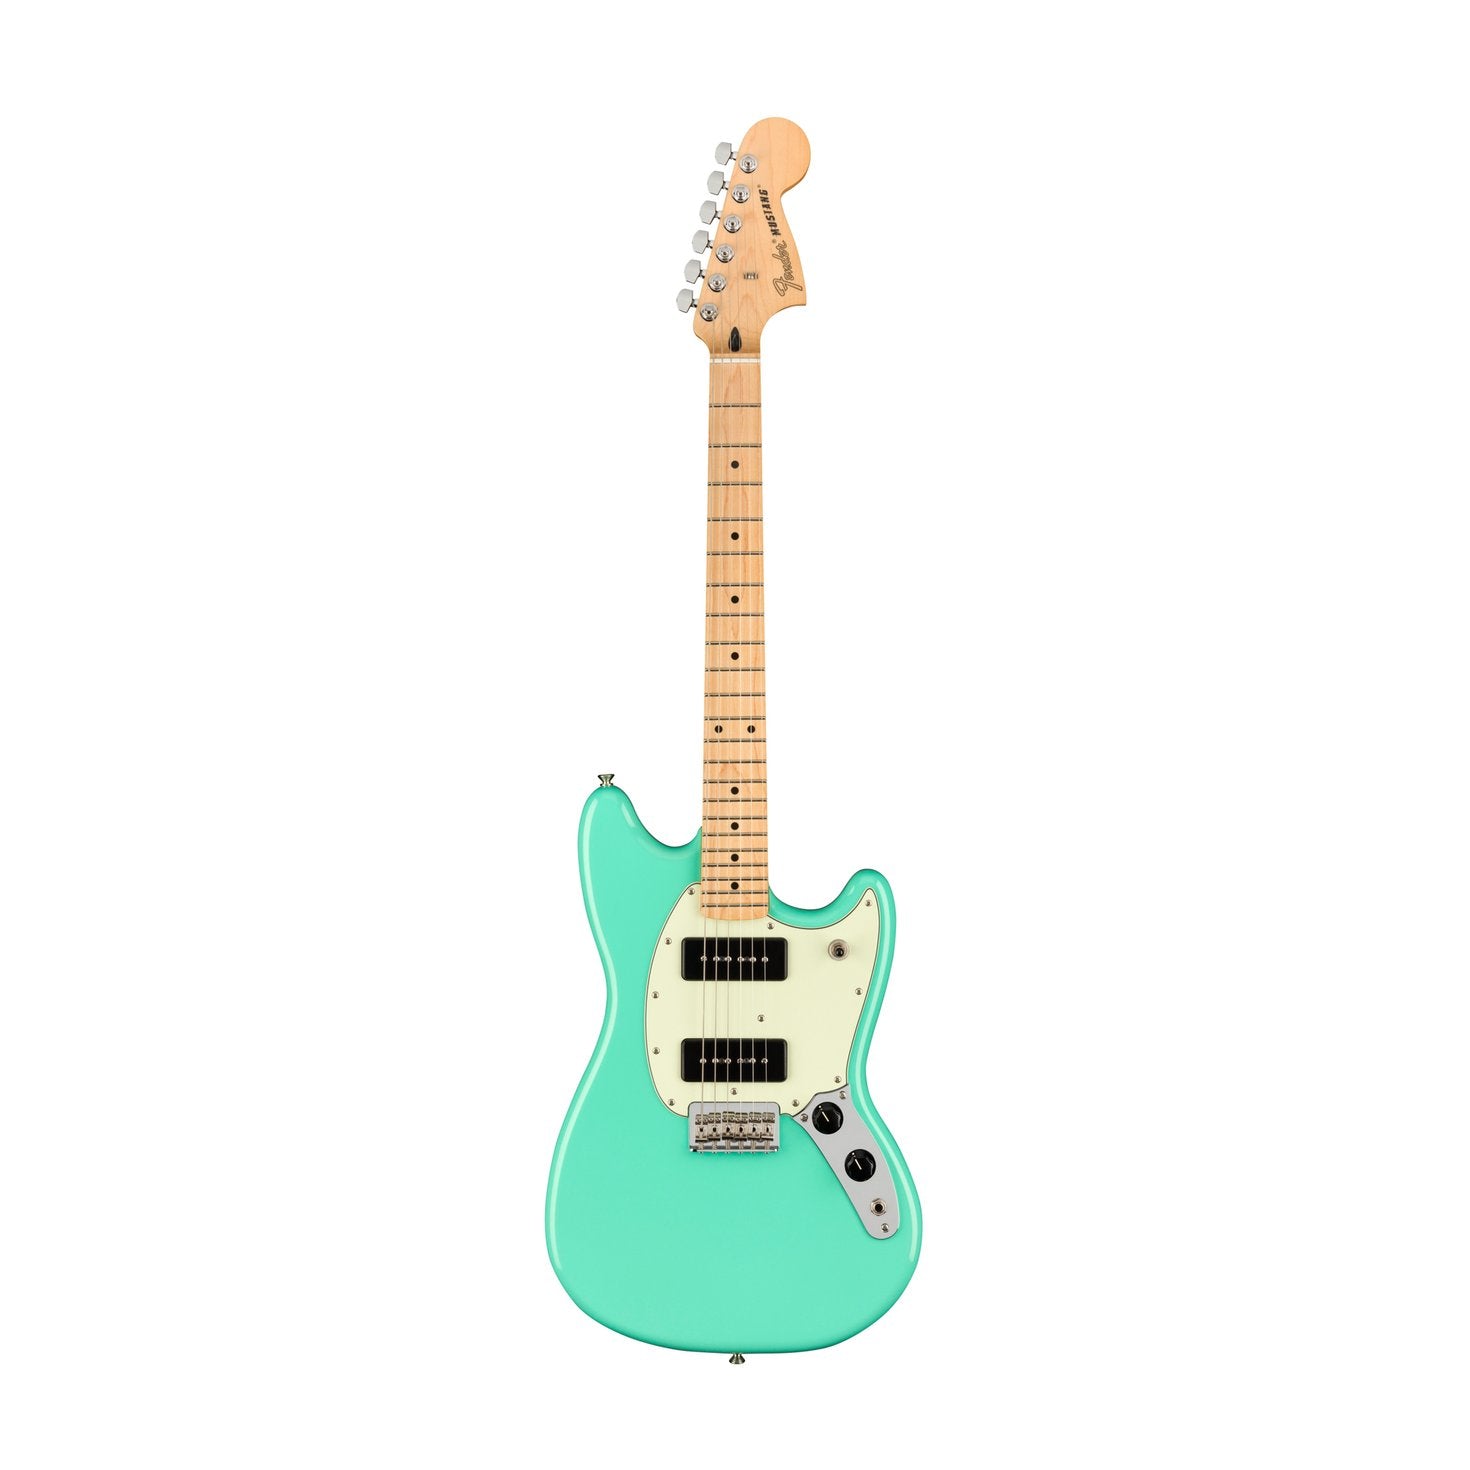 Fender Player Mustang 90 Electric Guitar, Maple FB, Seafoam Green, FENDER, ELECTRIC GUITAR, fender-eletric-guitar-f03-014-4142-573, ZOSO MUSIC SDN BHD